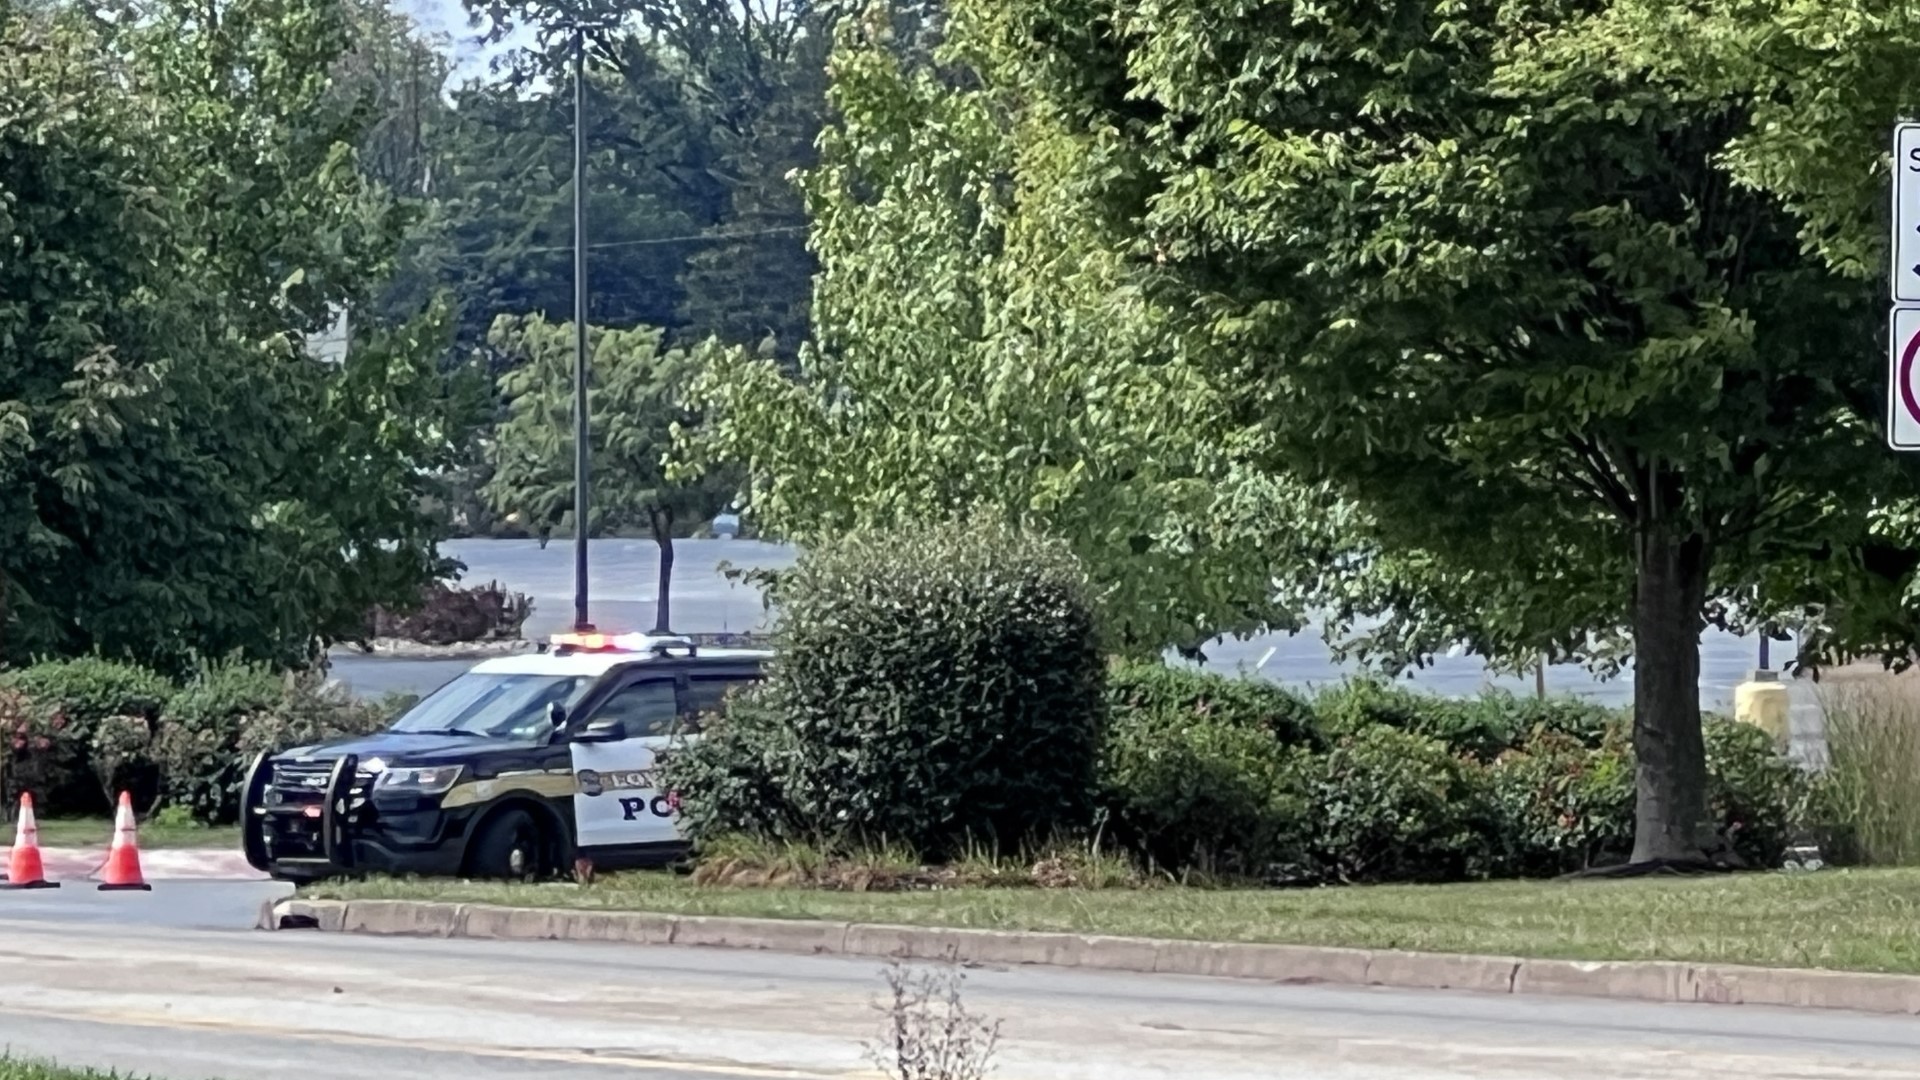 According to officials with the Department of Public Safety in Cumberland County, the Capital City Mall was evacuated due to a bomb threat.